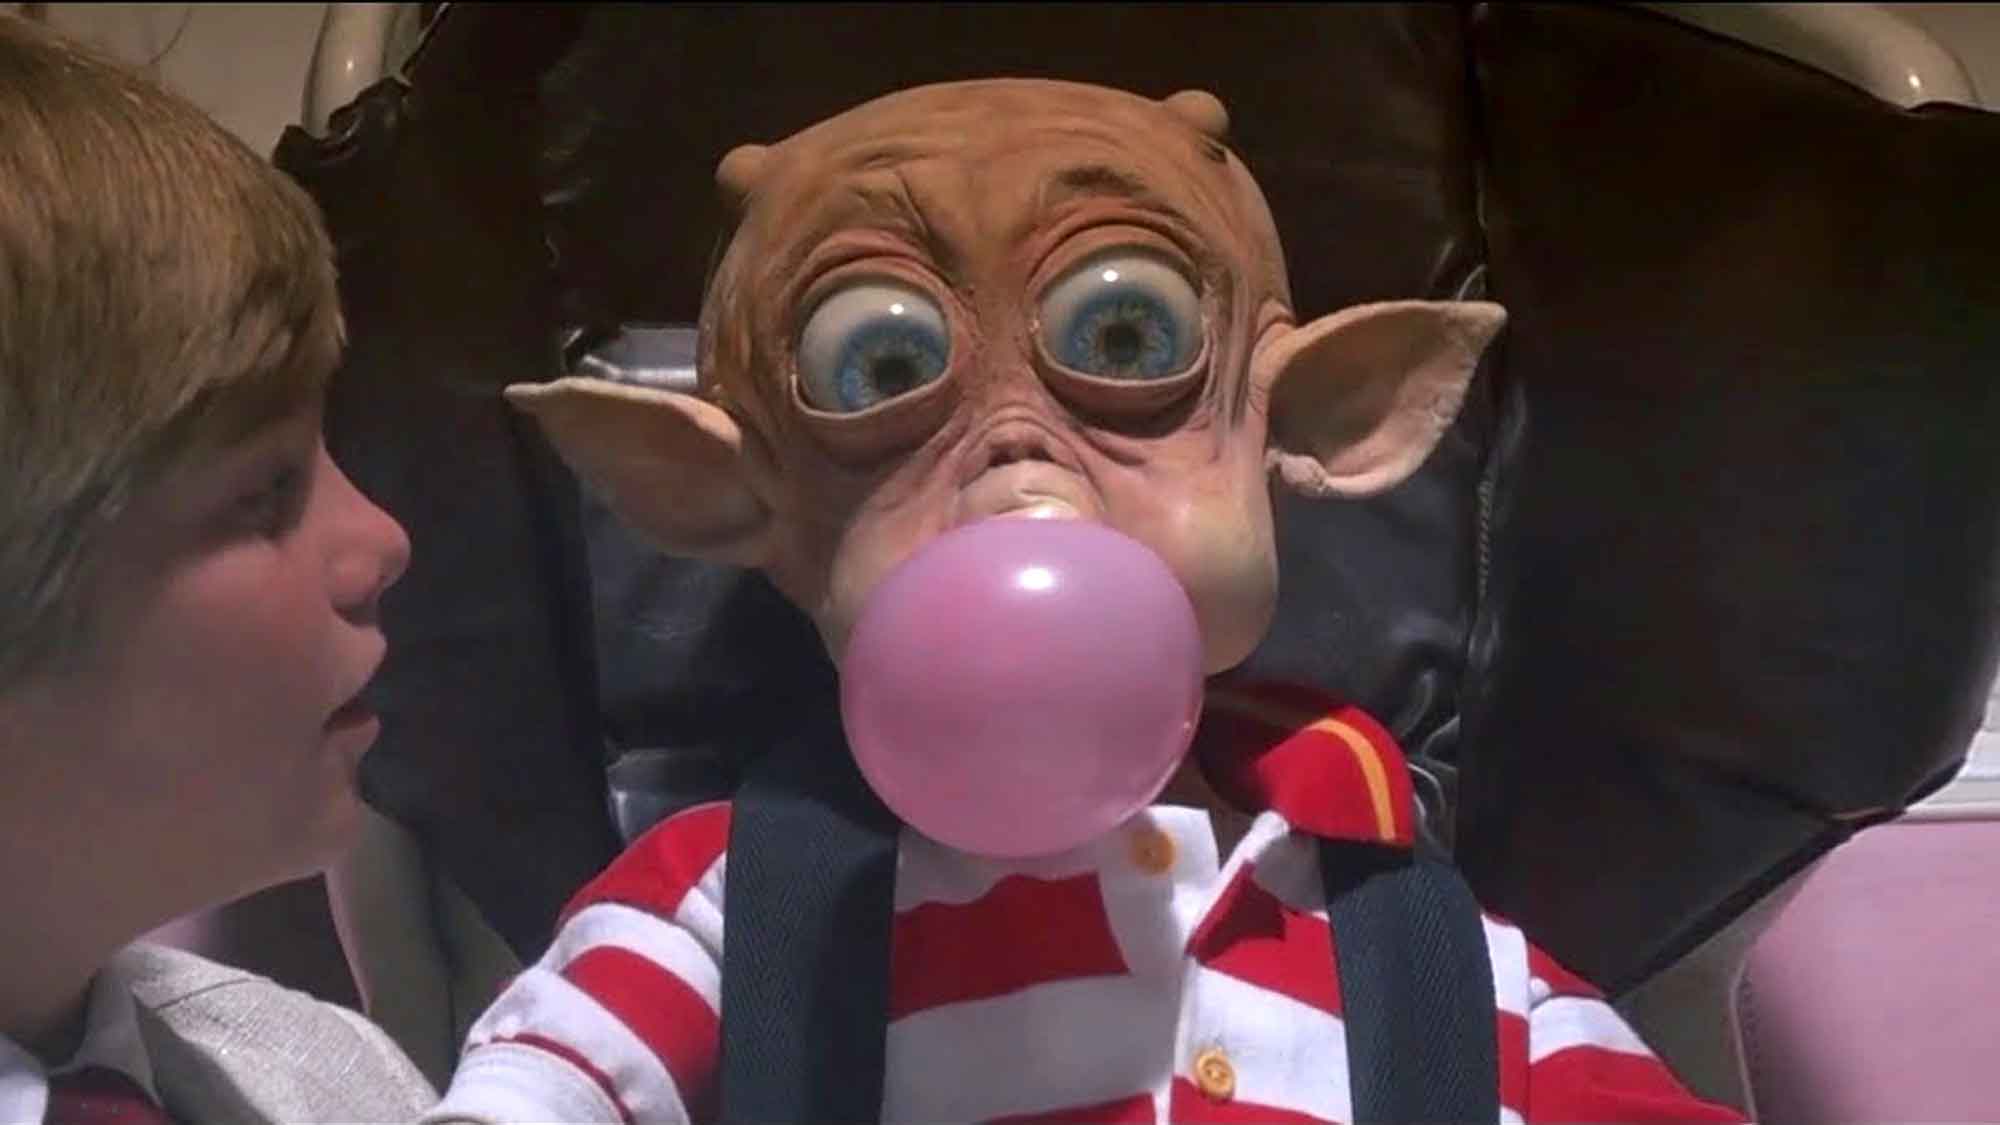 Mac and Me. McDonalds is/was never this awesome.-u/goosebattle